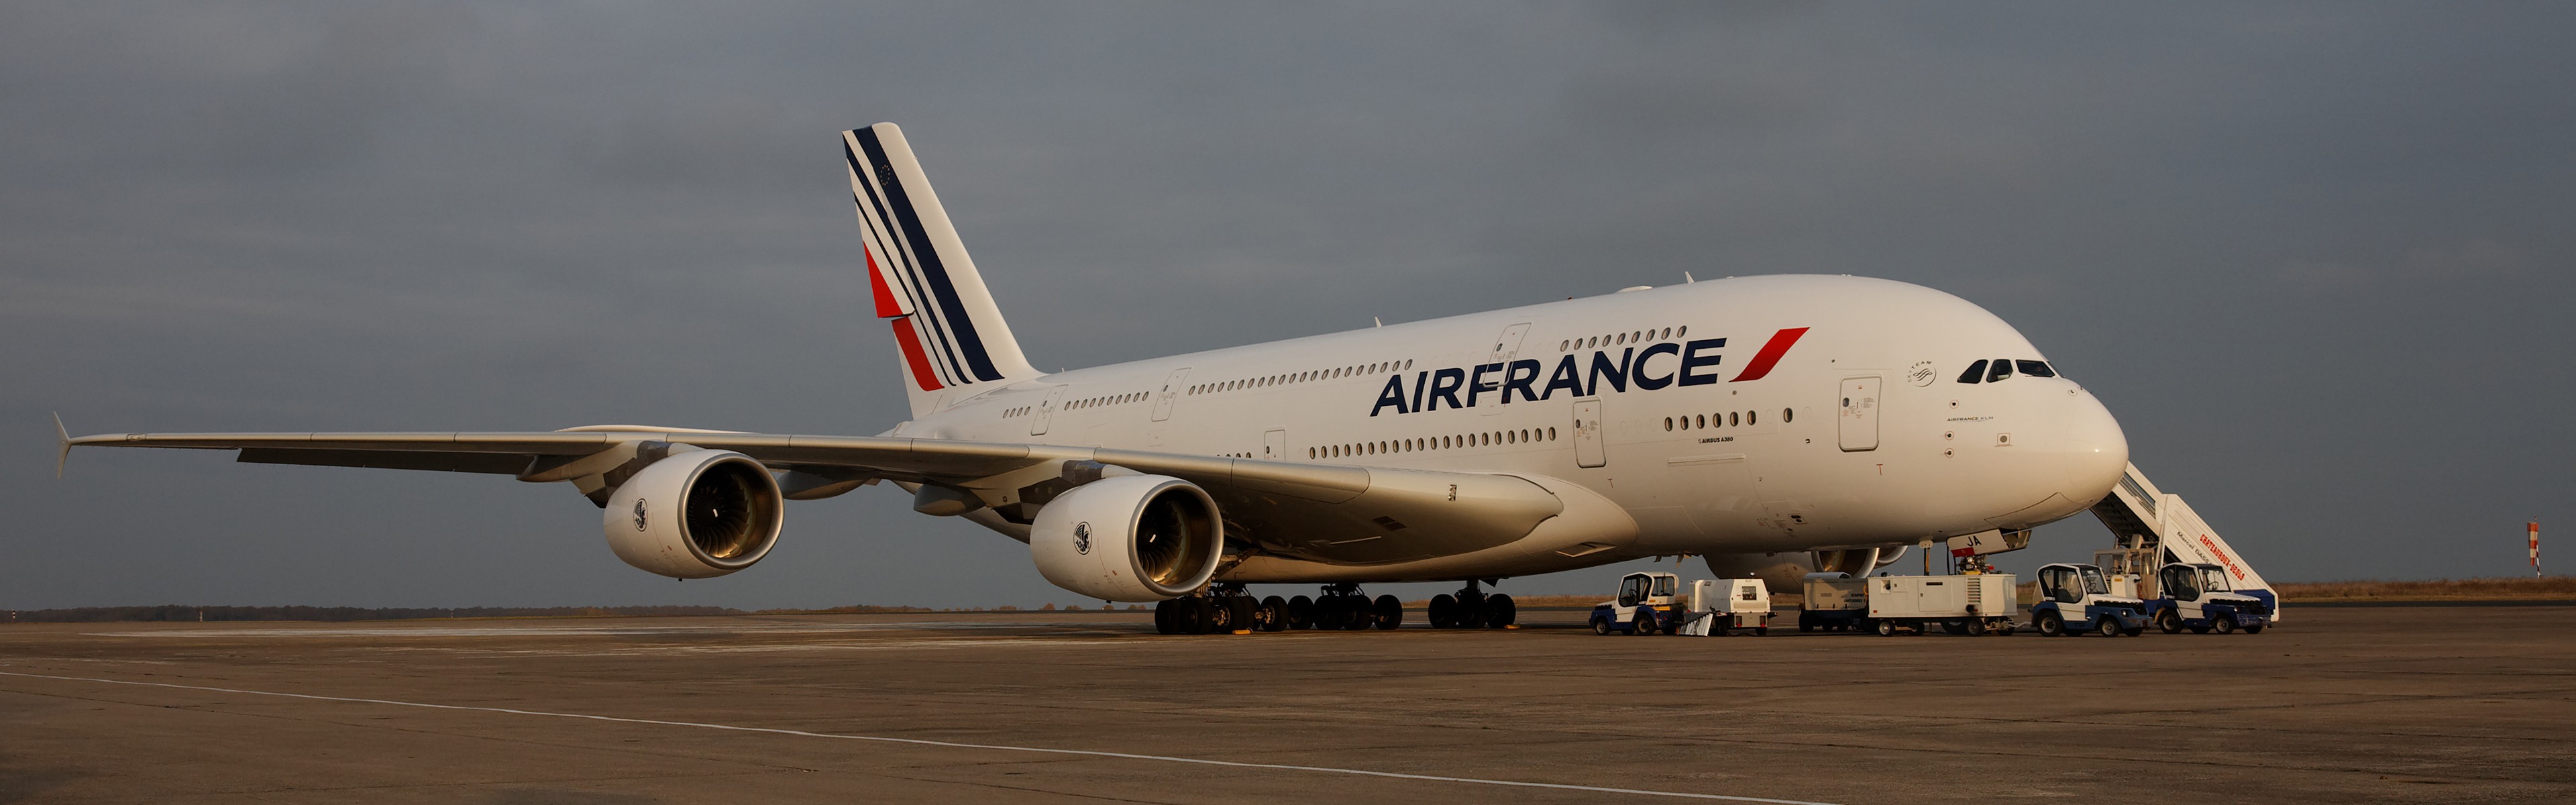 General 3840x1200 Air France Airbus A380 Airbus airplane aircraft dual monitors passenger aircraft vehicle airline french aircraft overcast multiple display sky